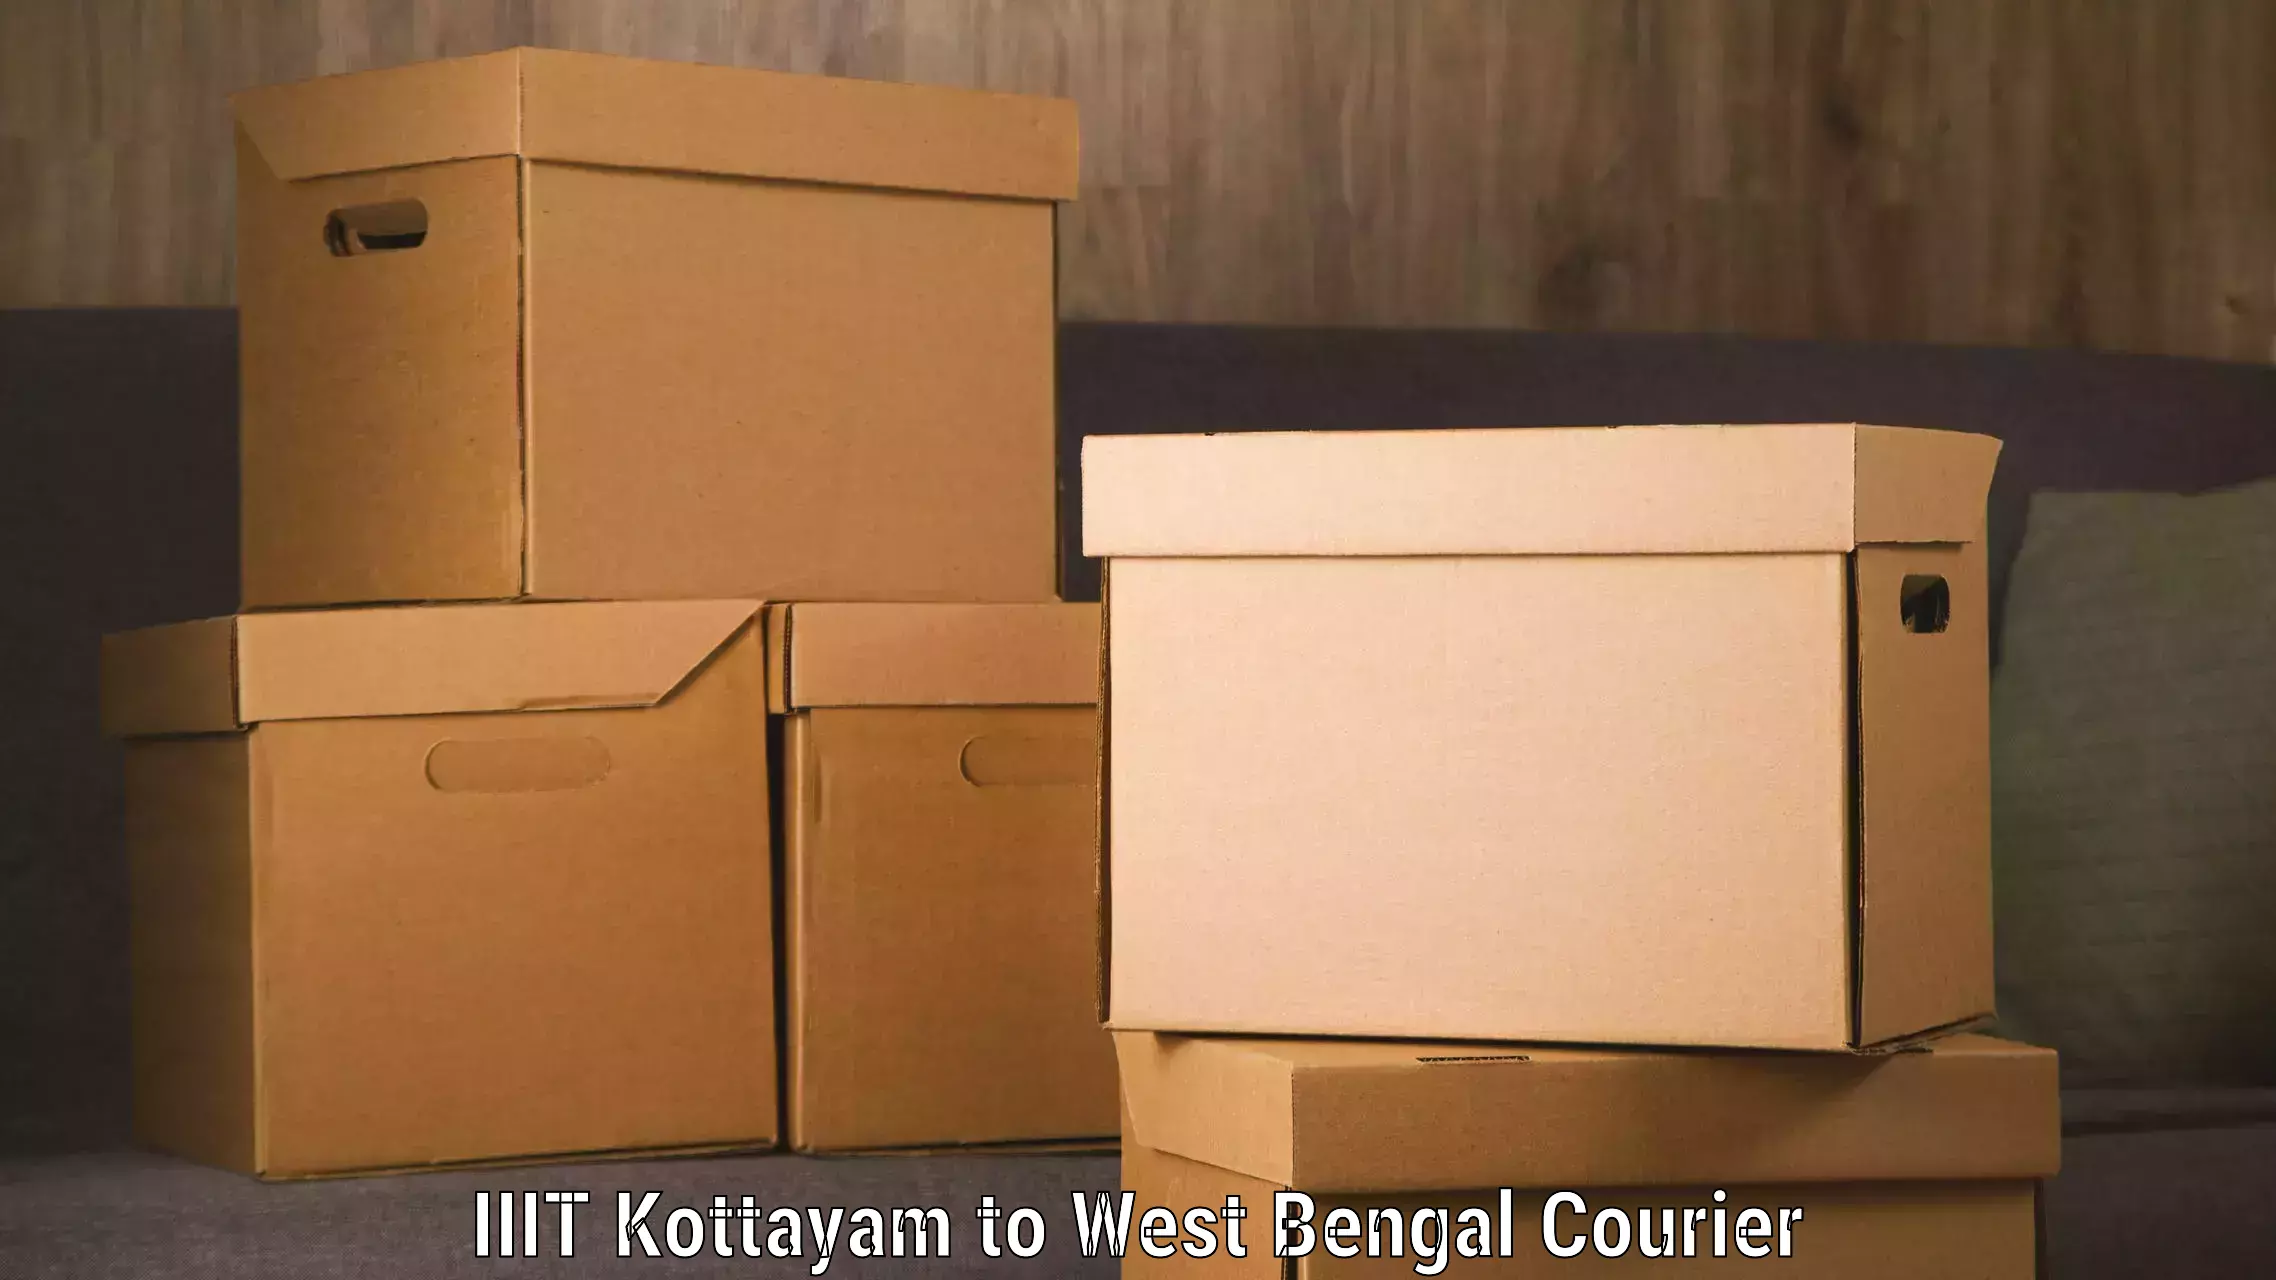 Budget-friendly shipping IIIT Kottayam to West Bengal